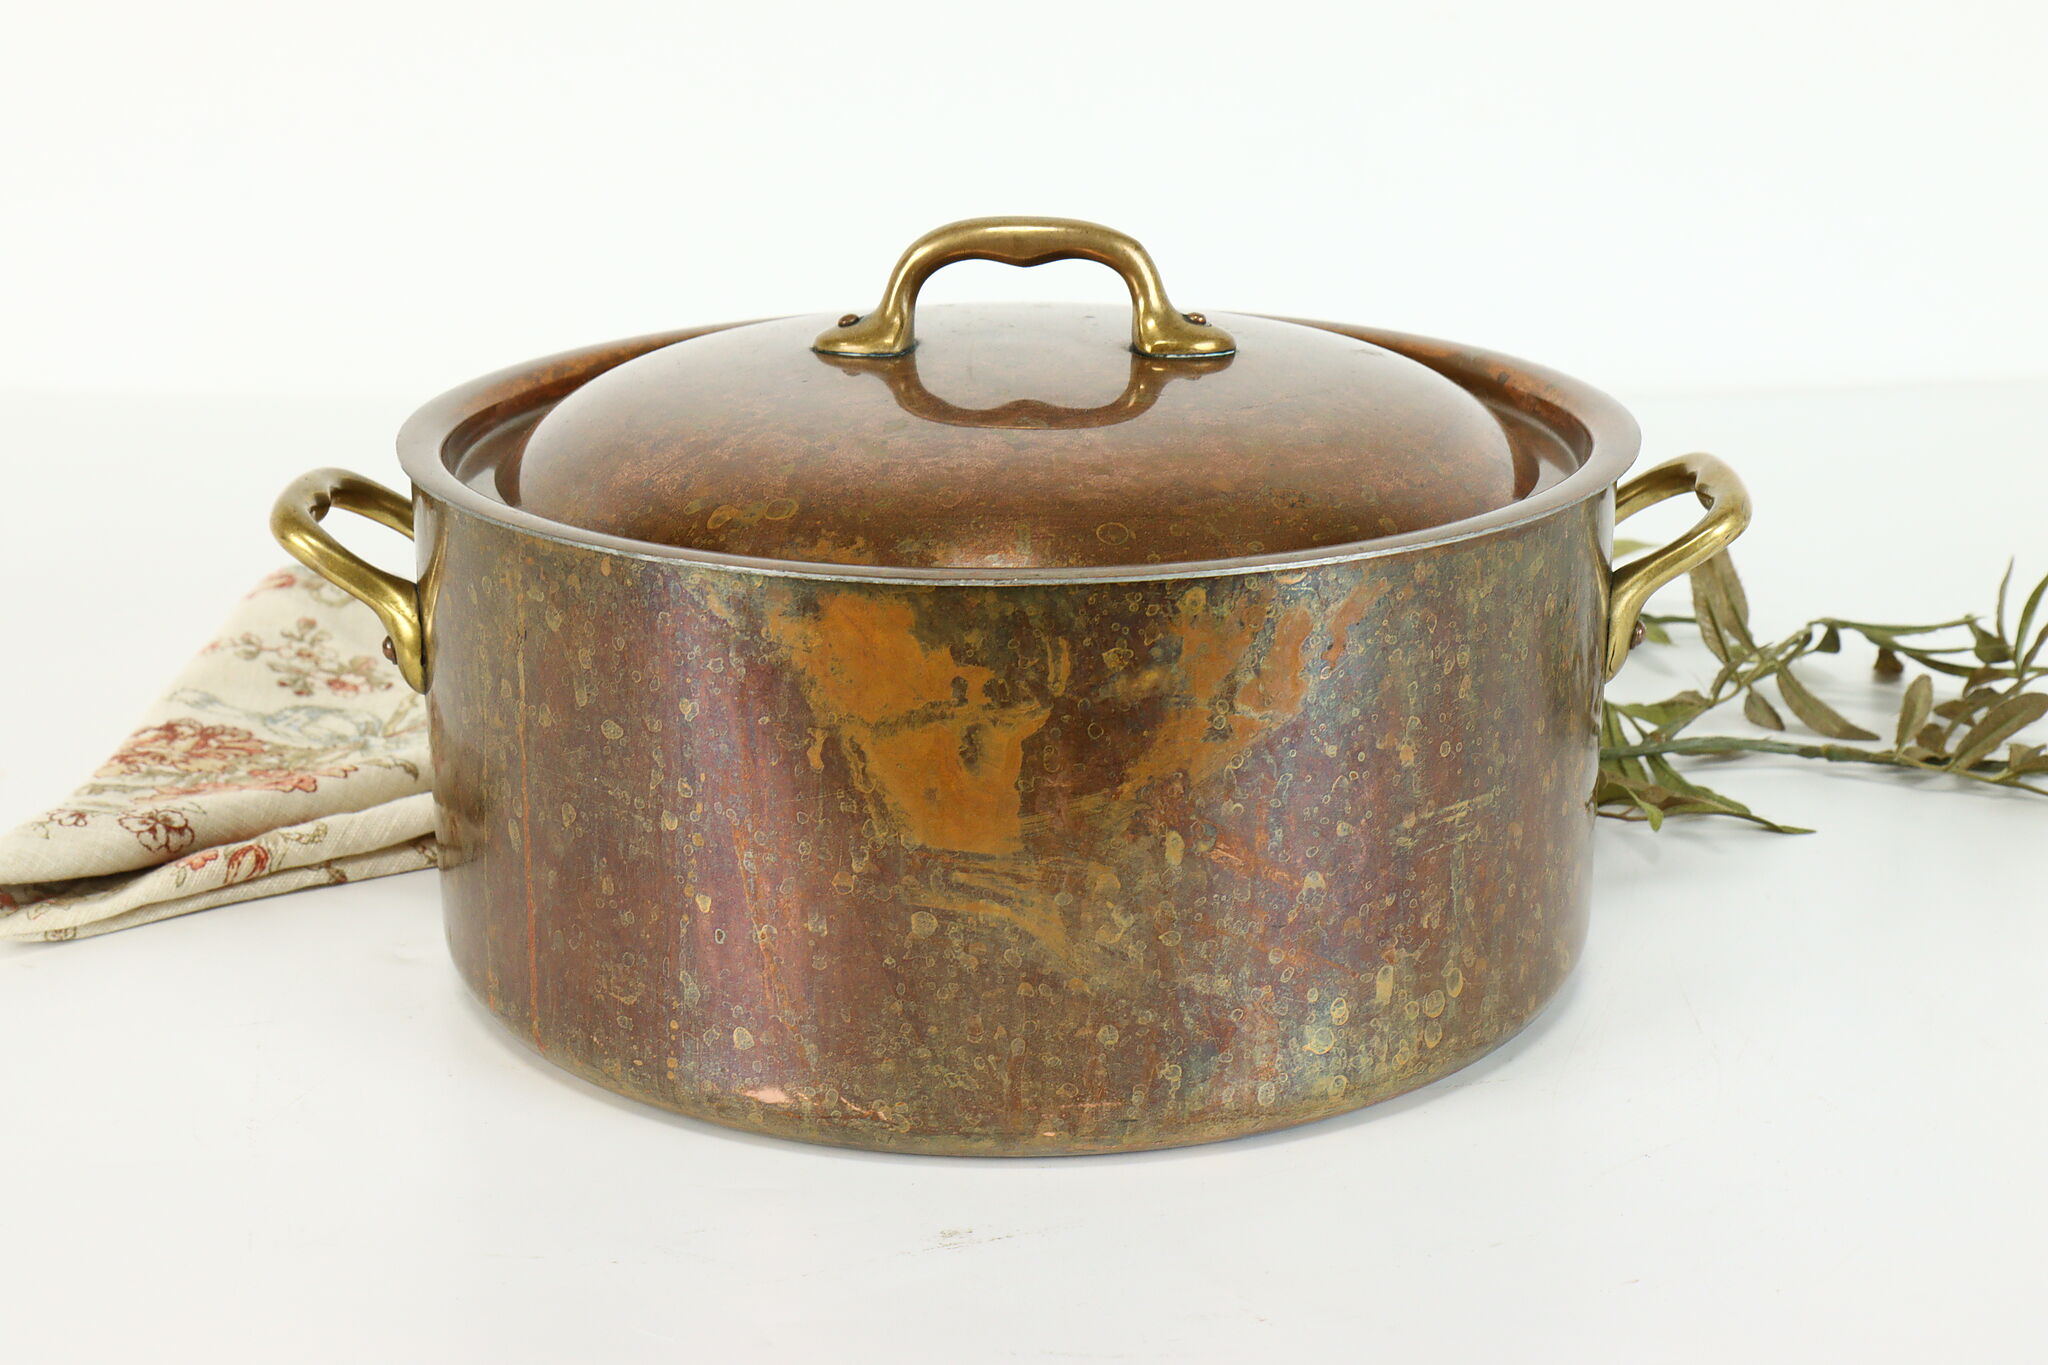 Farmhouse Vintage French Copper Dutch Oven with Lid & Brass Handles